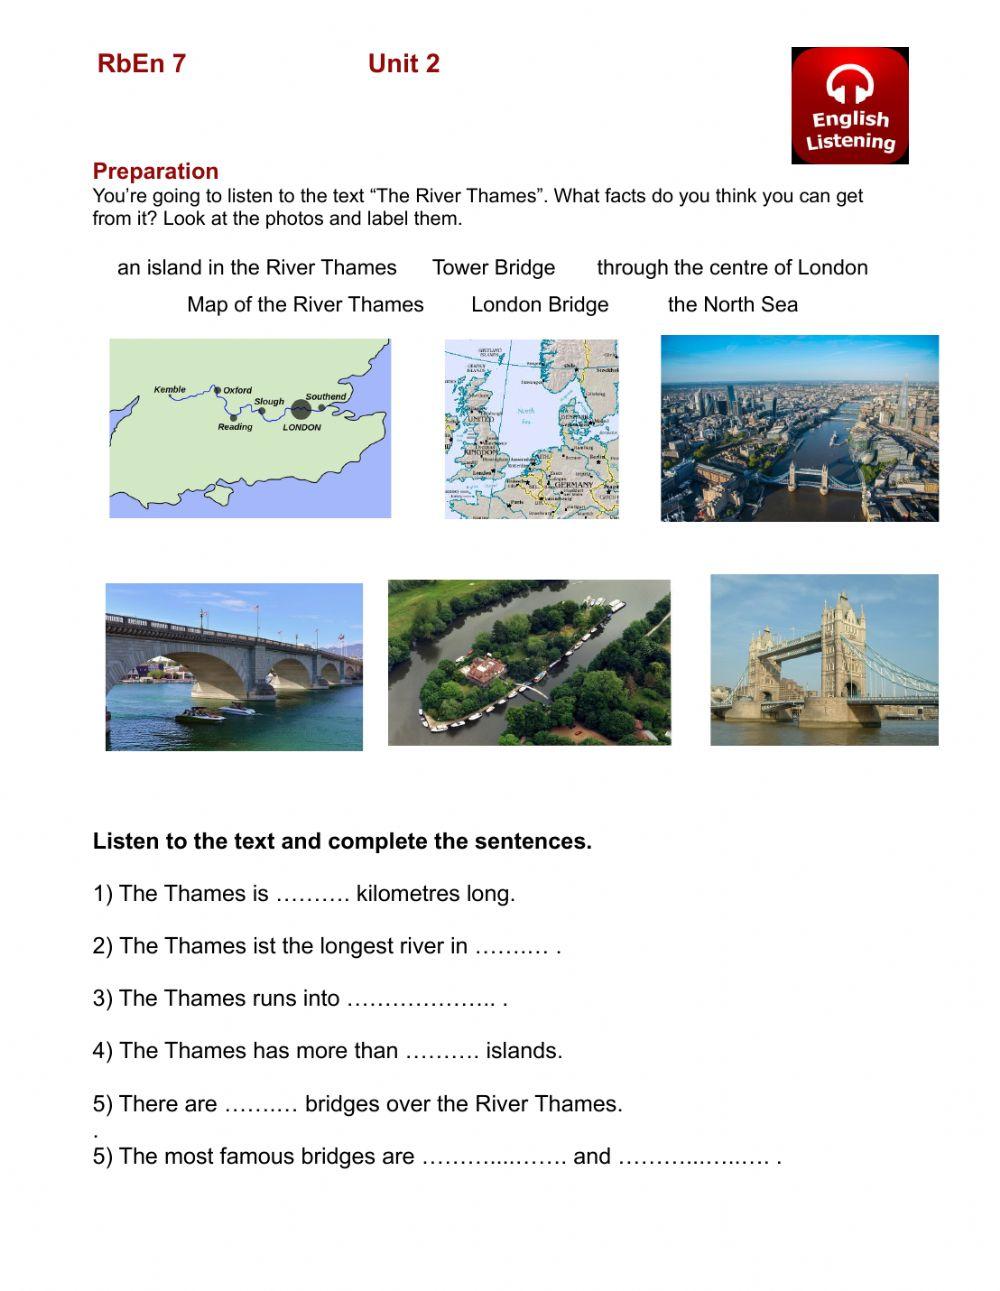 RbEn 6 - Unit 2 - Listening 1 - Facts about the River Thames